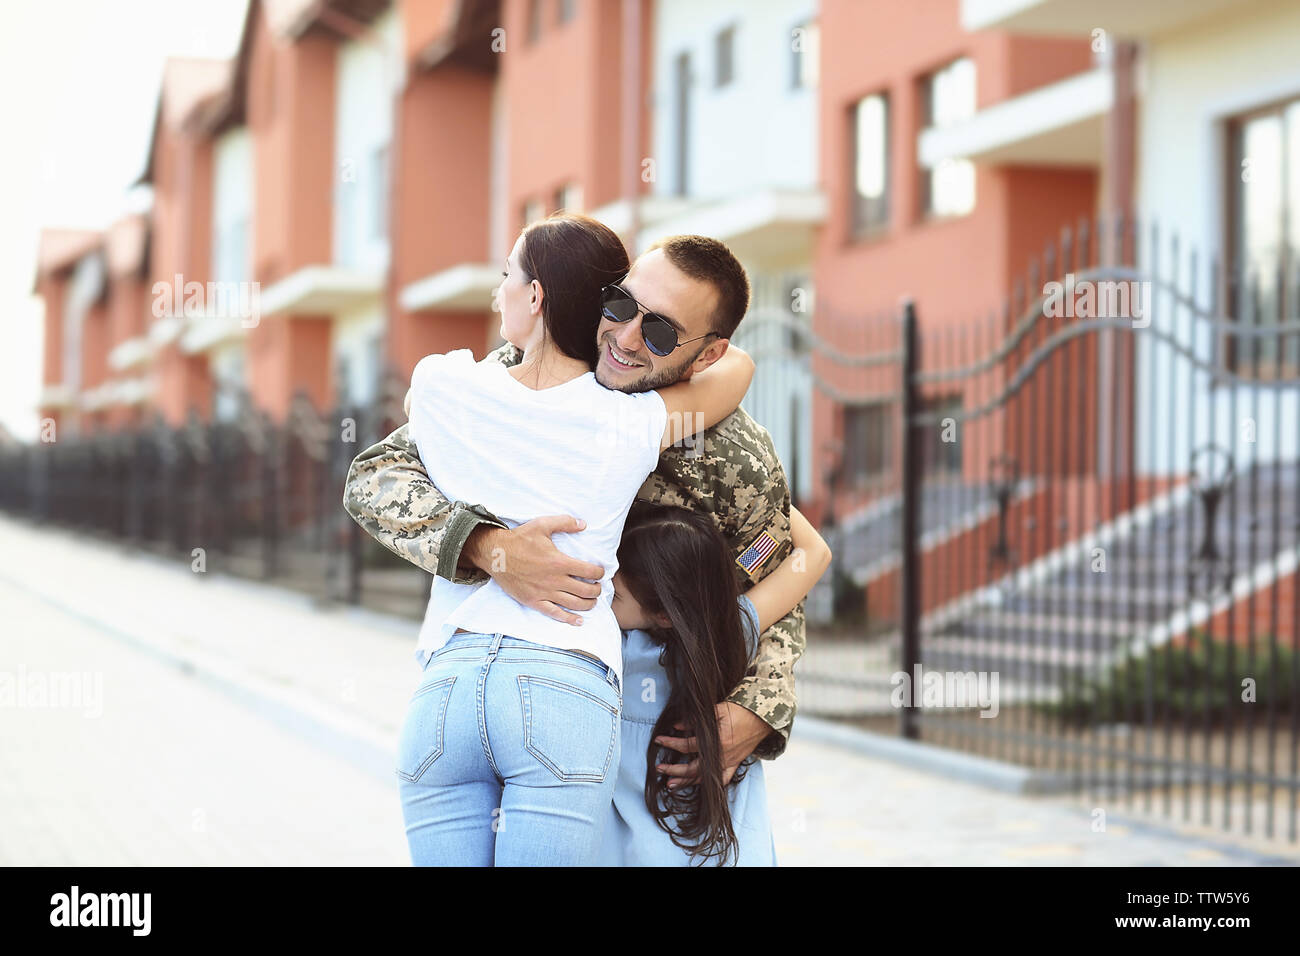 Happy reunion of US army soldier with family Stock Photo